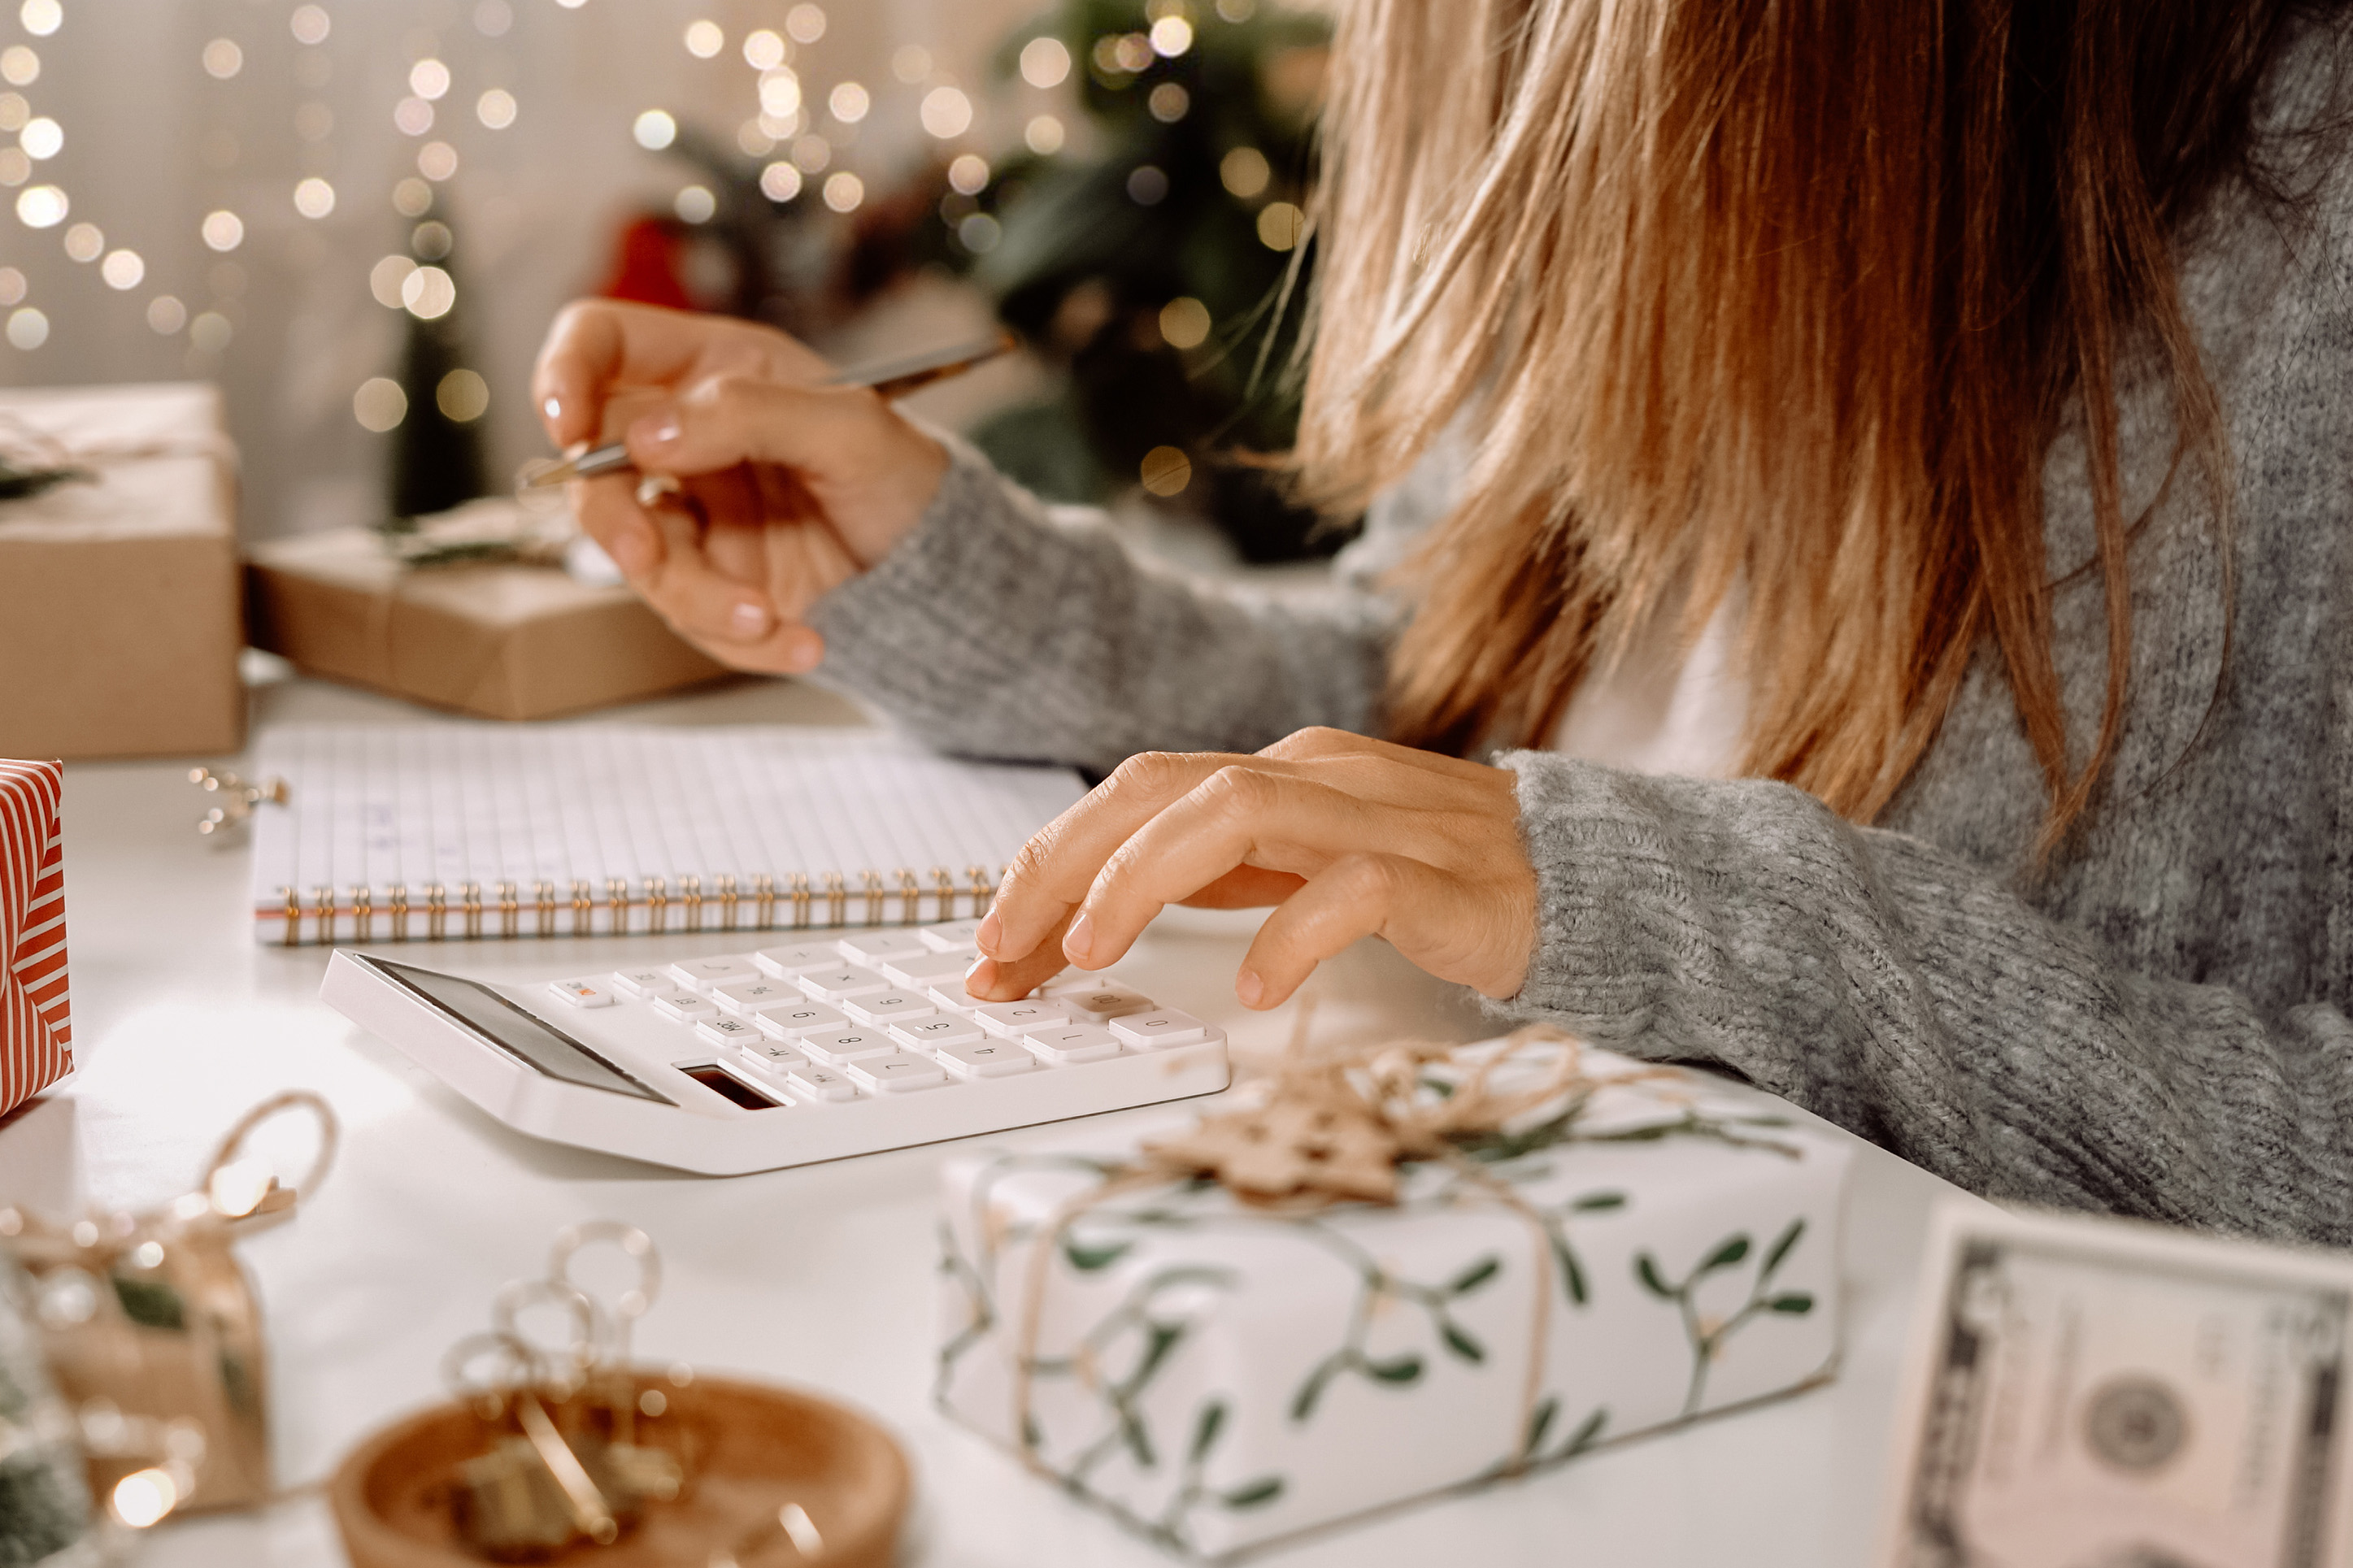 Woman budgeting for holiday gifts. 